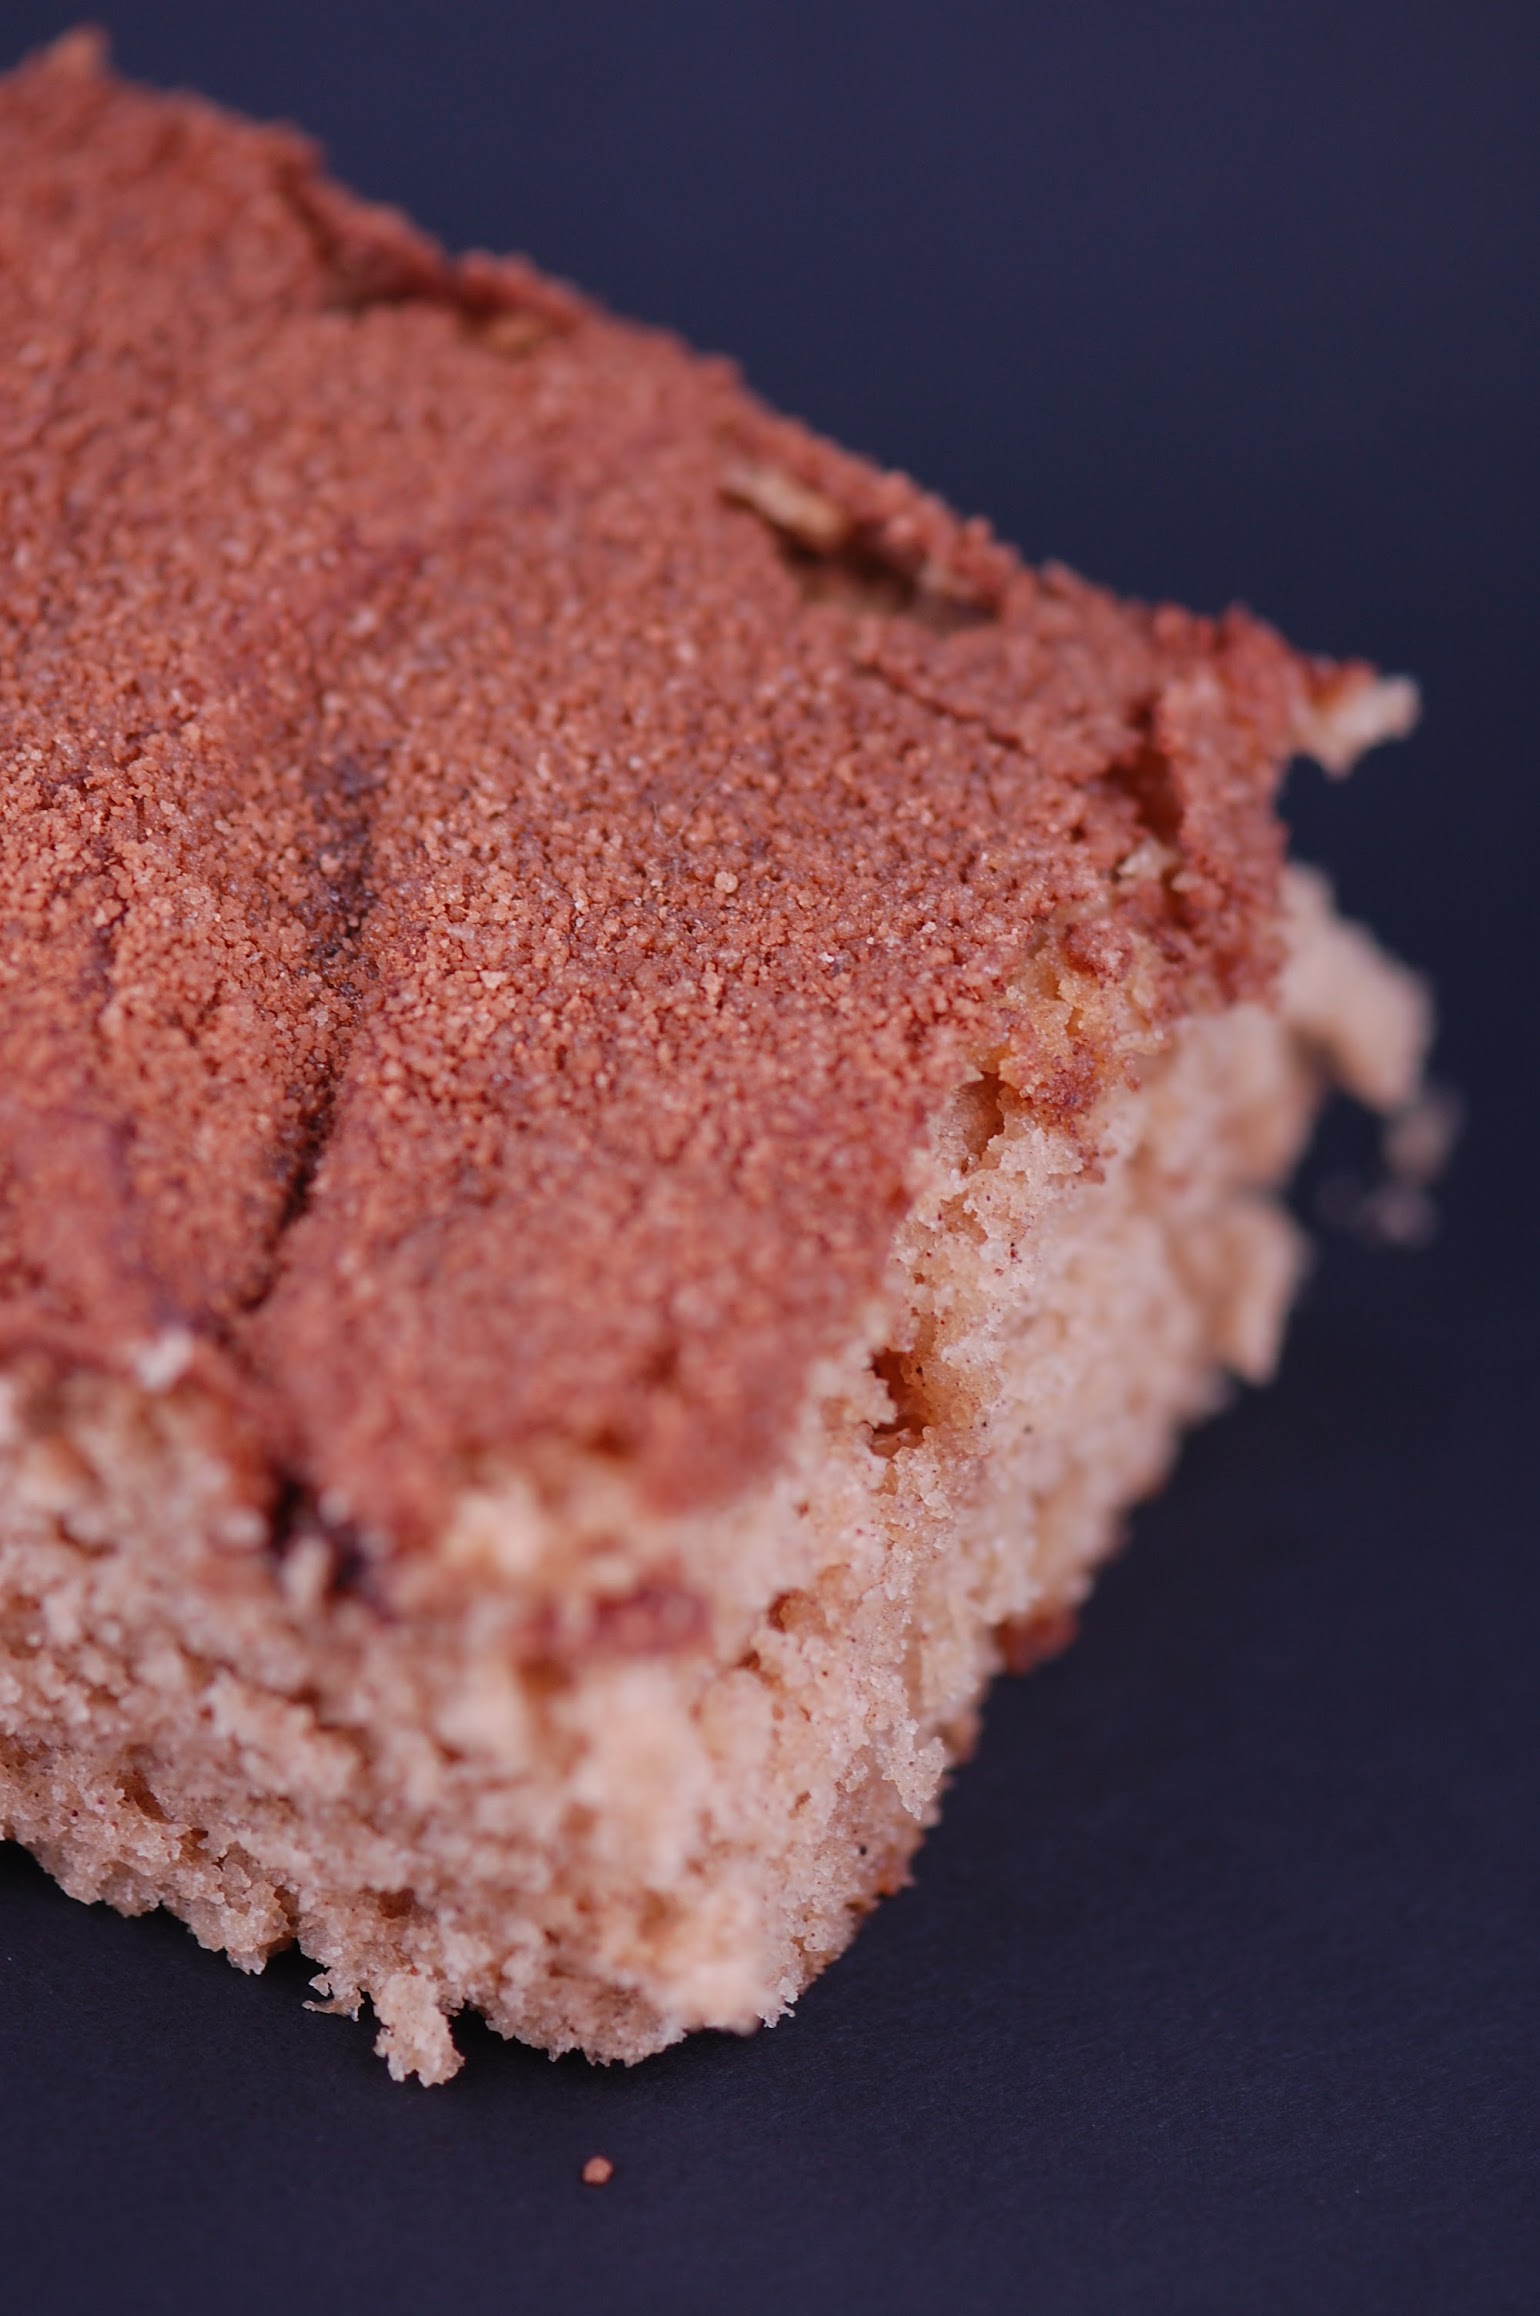 Another close up of the coffee cake 